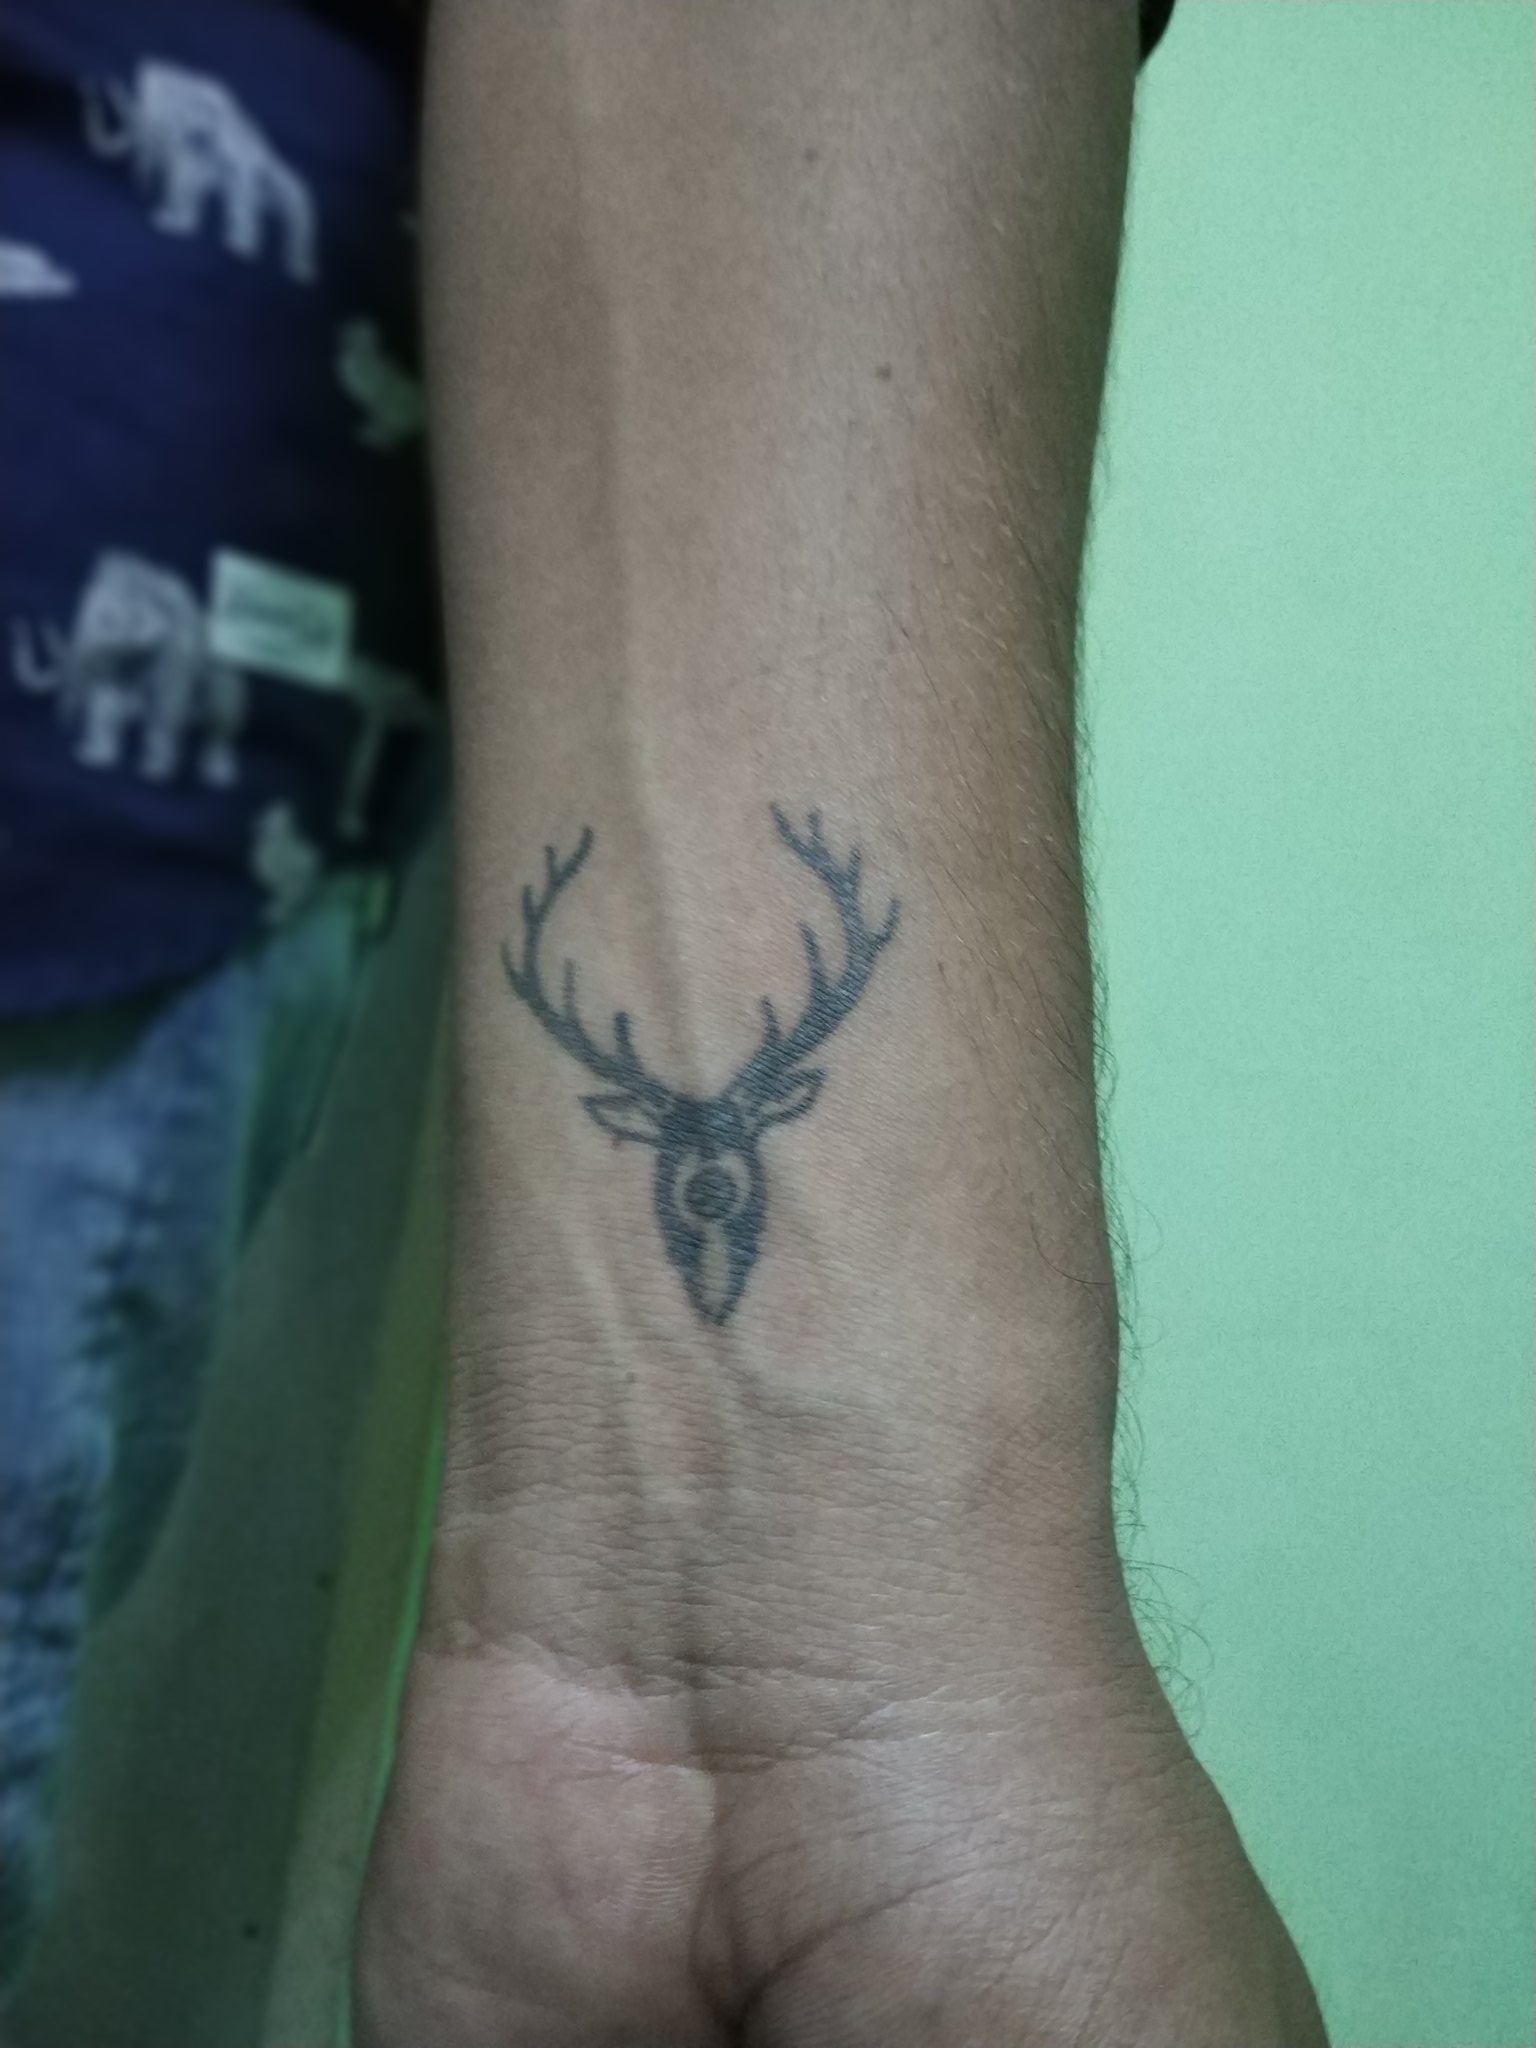 Shaurya on X: @allensolly @AdityaBirlaGrp nothing says u r are a cool dude  more than an allen solly tatto. #bestpromotiontechnique #retweet #allensolly  @vikassehgal9955  / X